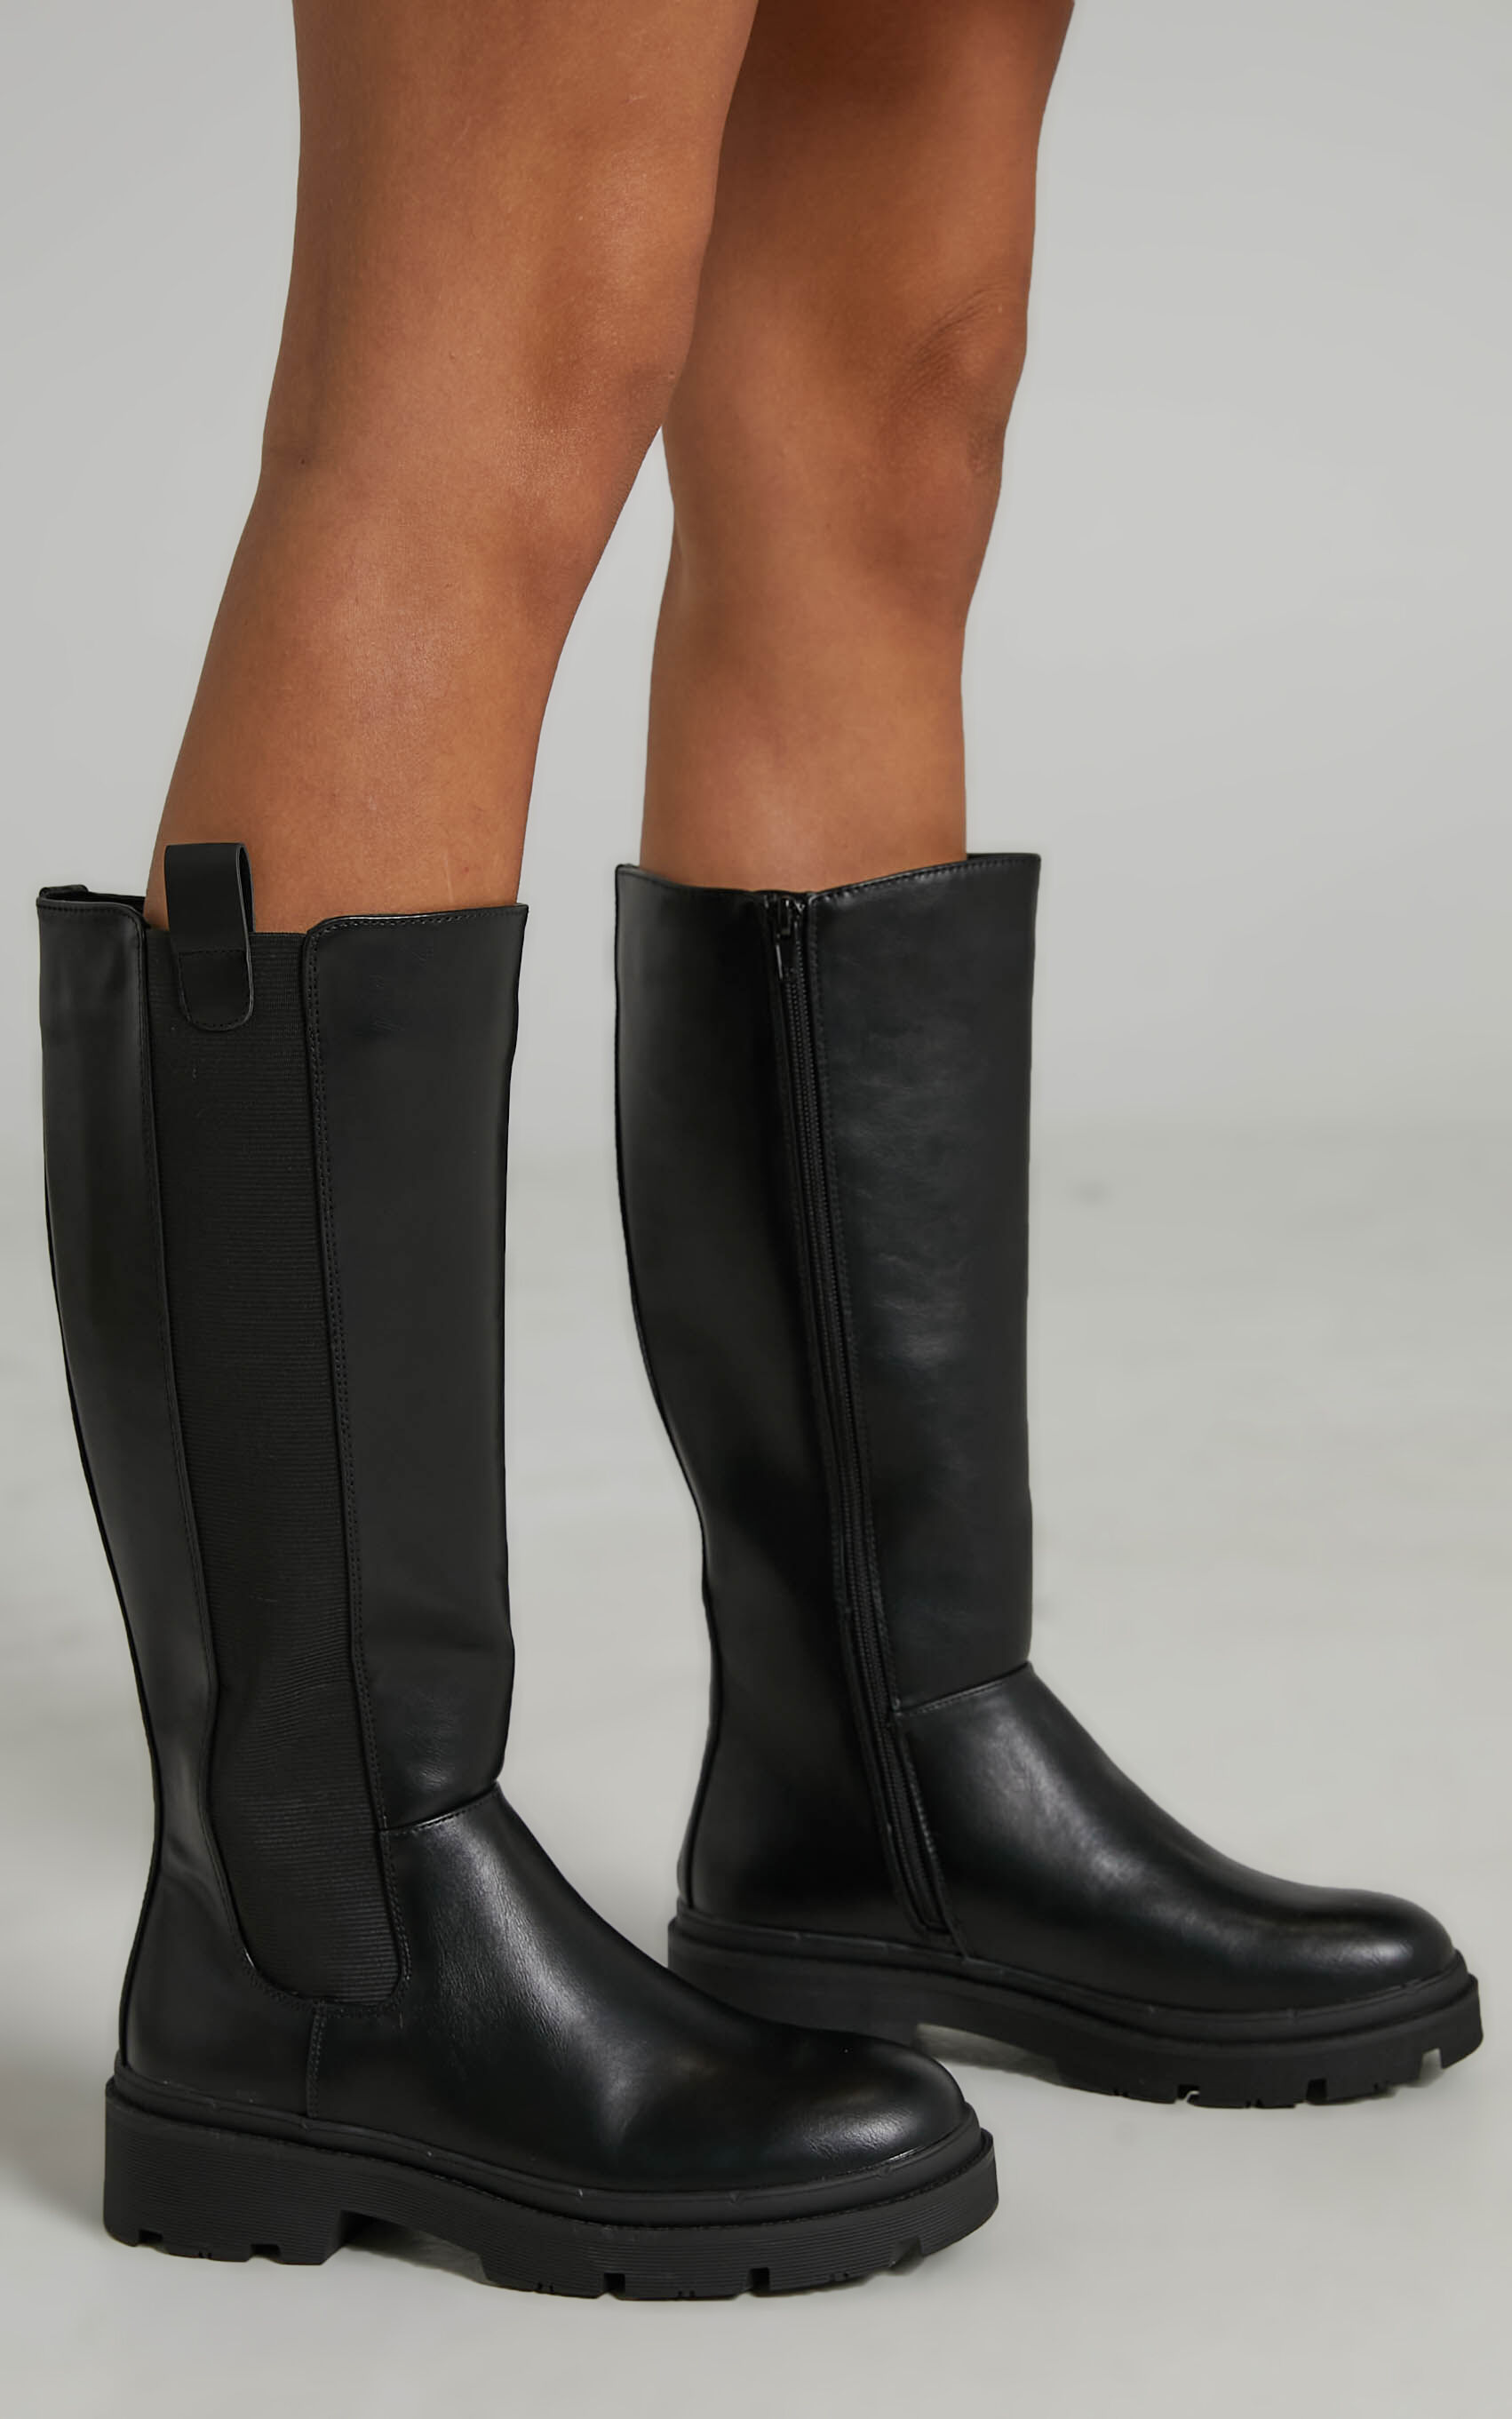 Therapy - Thandie Boots in Black - 05, BLK1, super-hi-res image number null